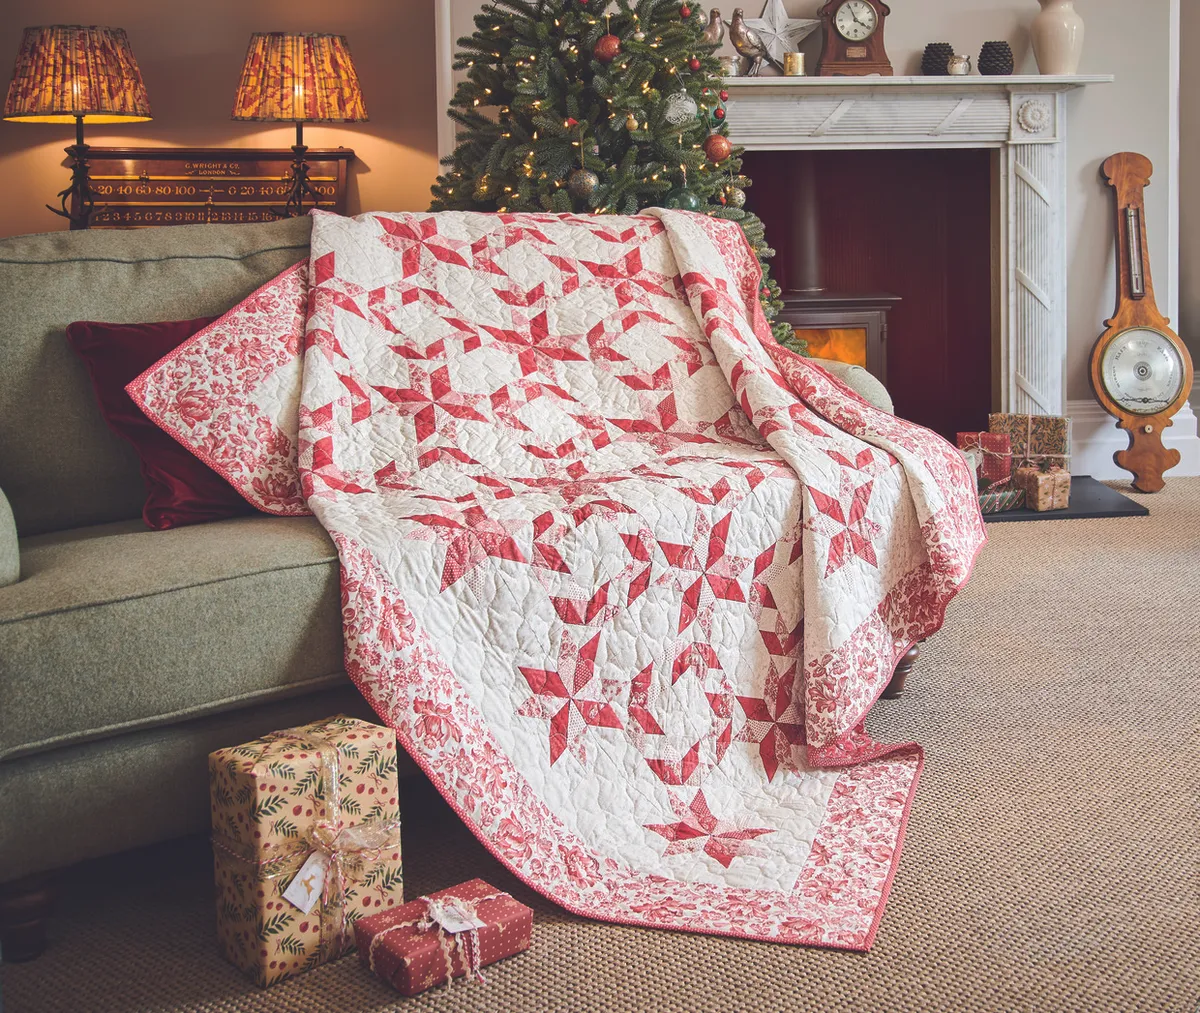 Lynne Goldsworthy's two colour Christmas quilt